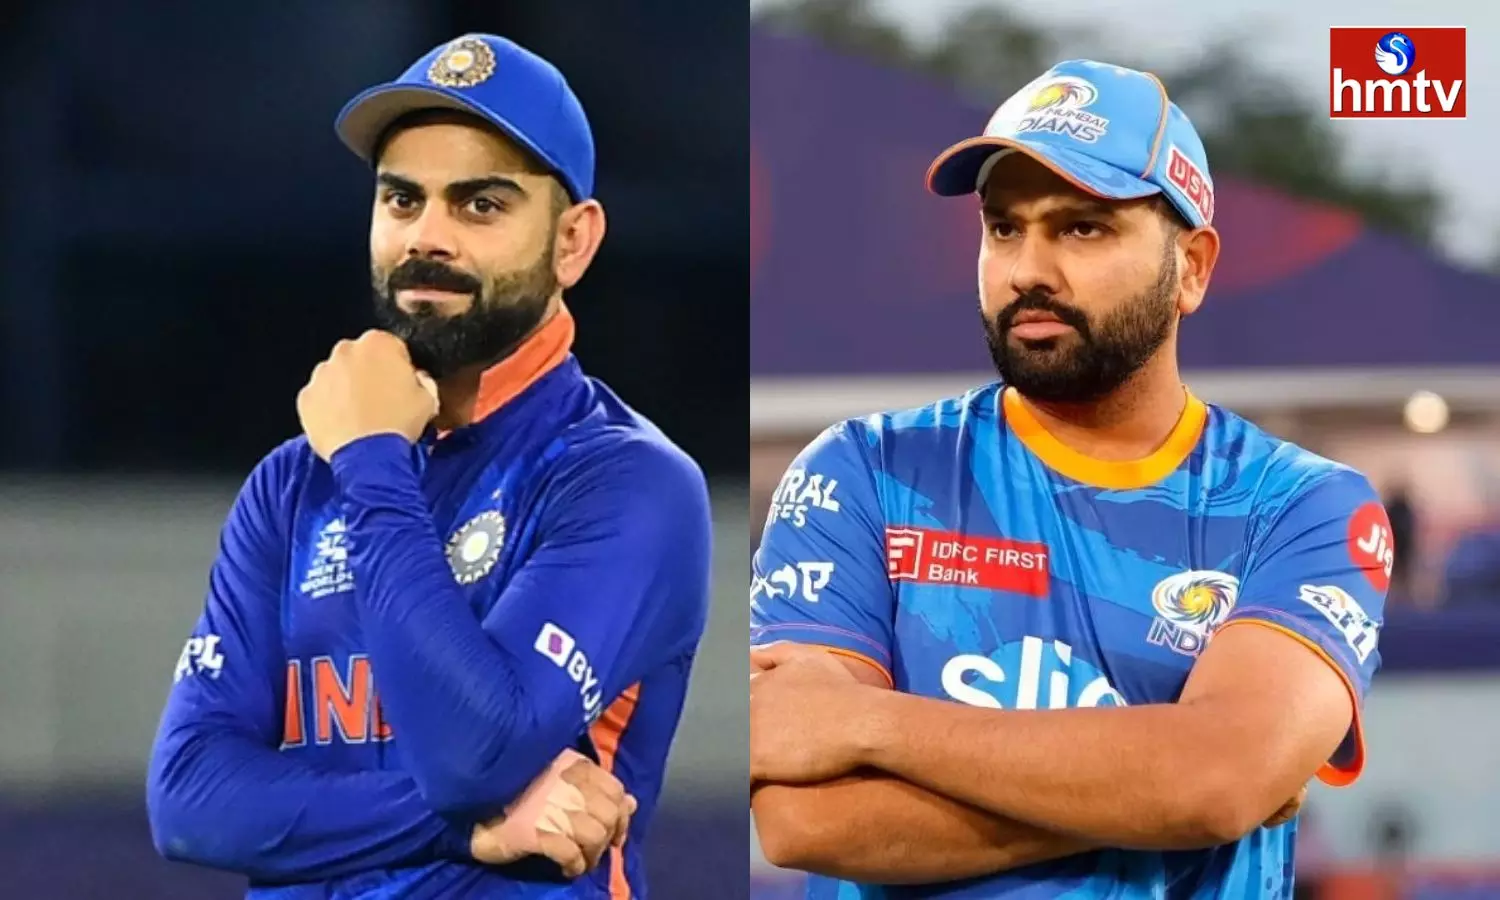 BCCI Likely To Rest Kohli, Rohit And Others Amid West IndiesTour